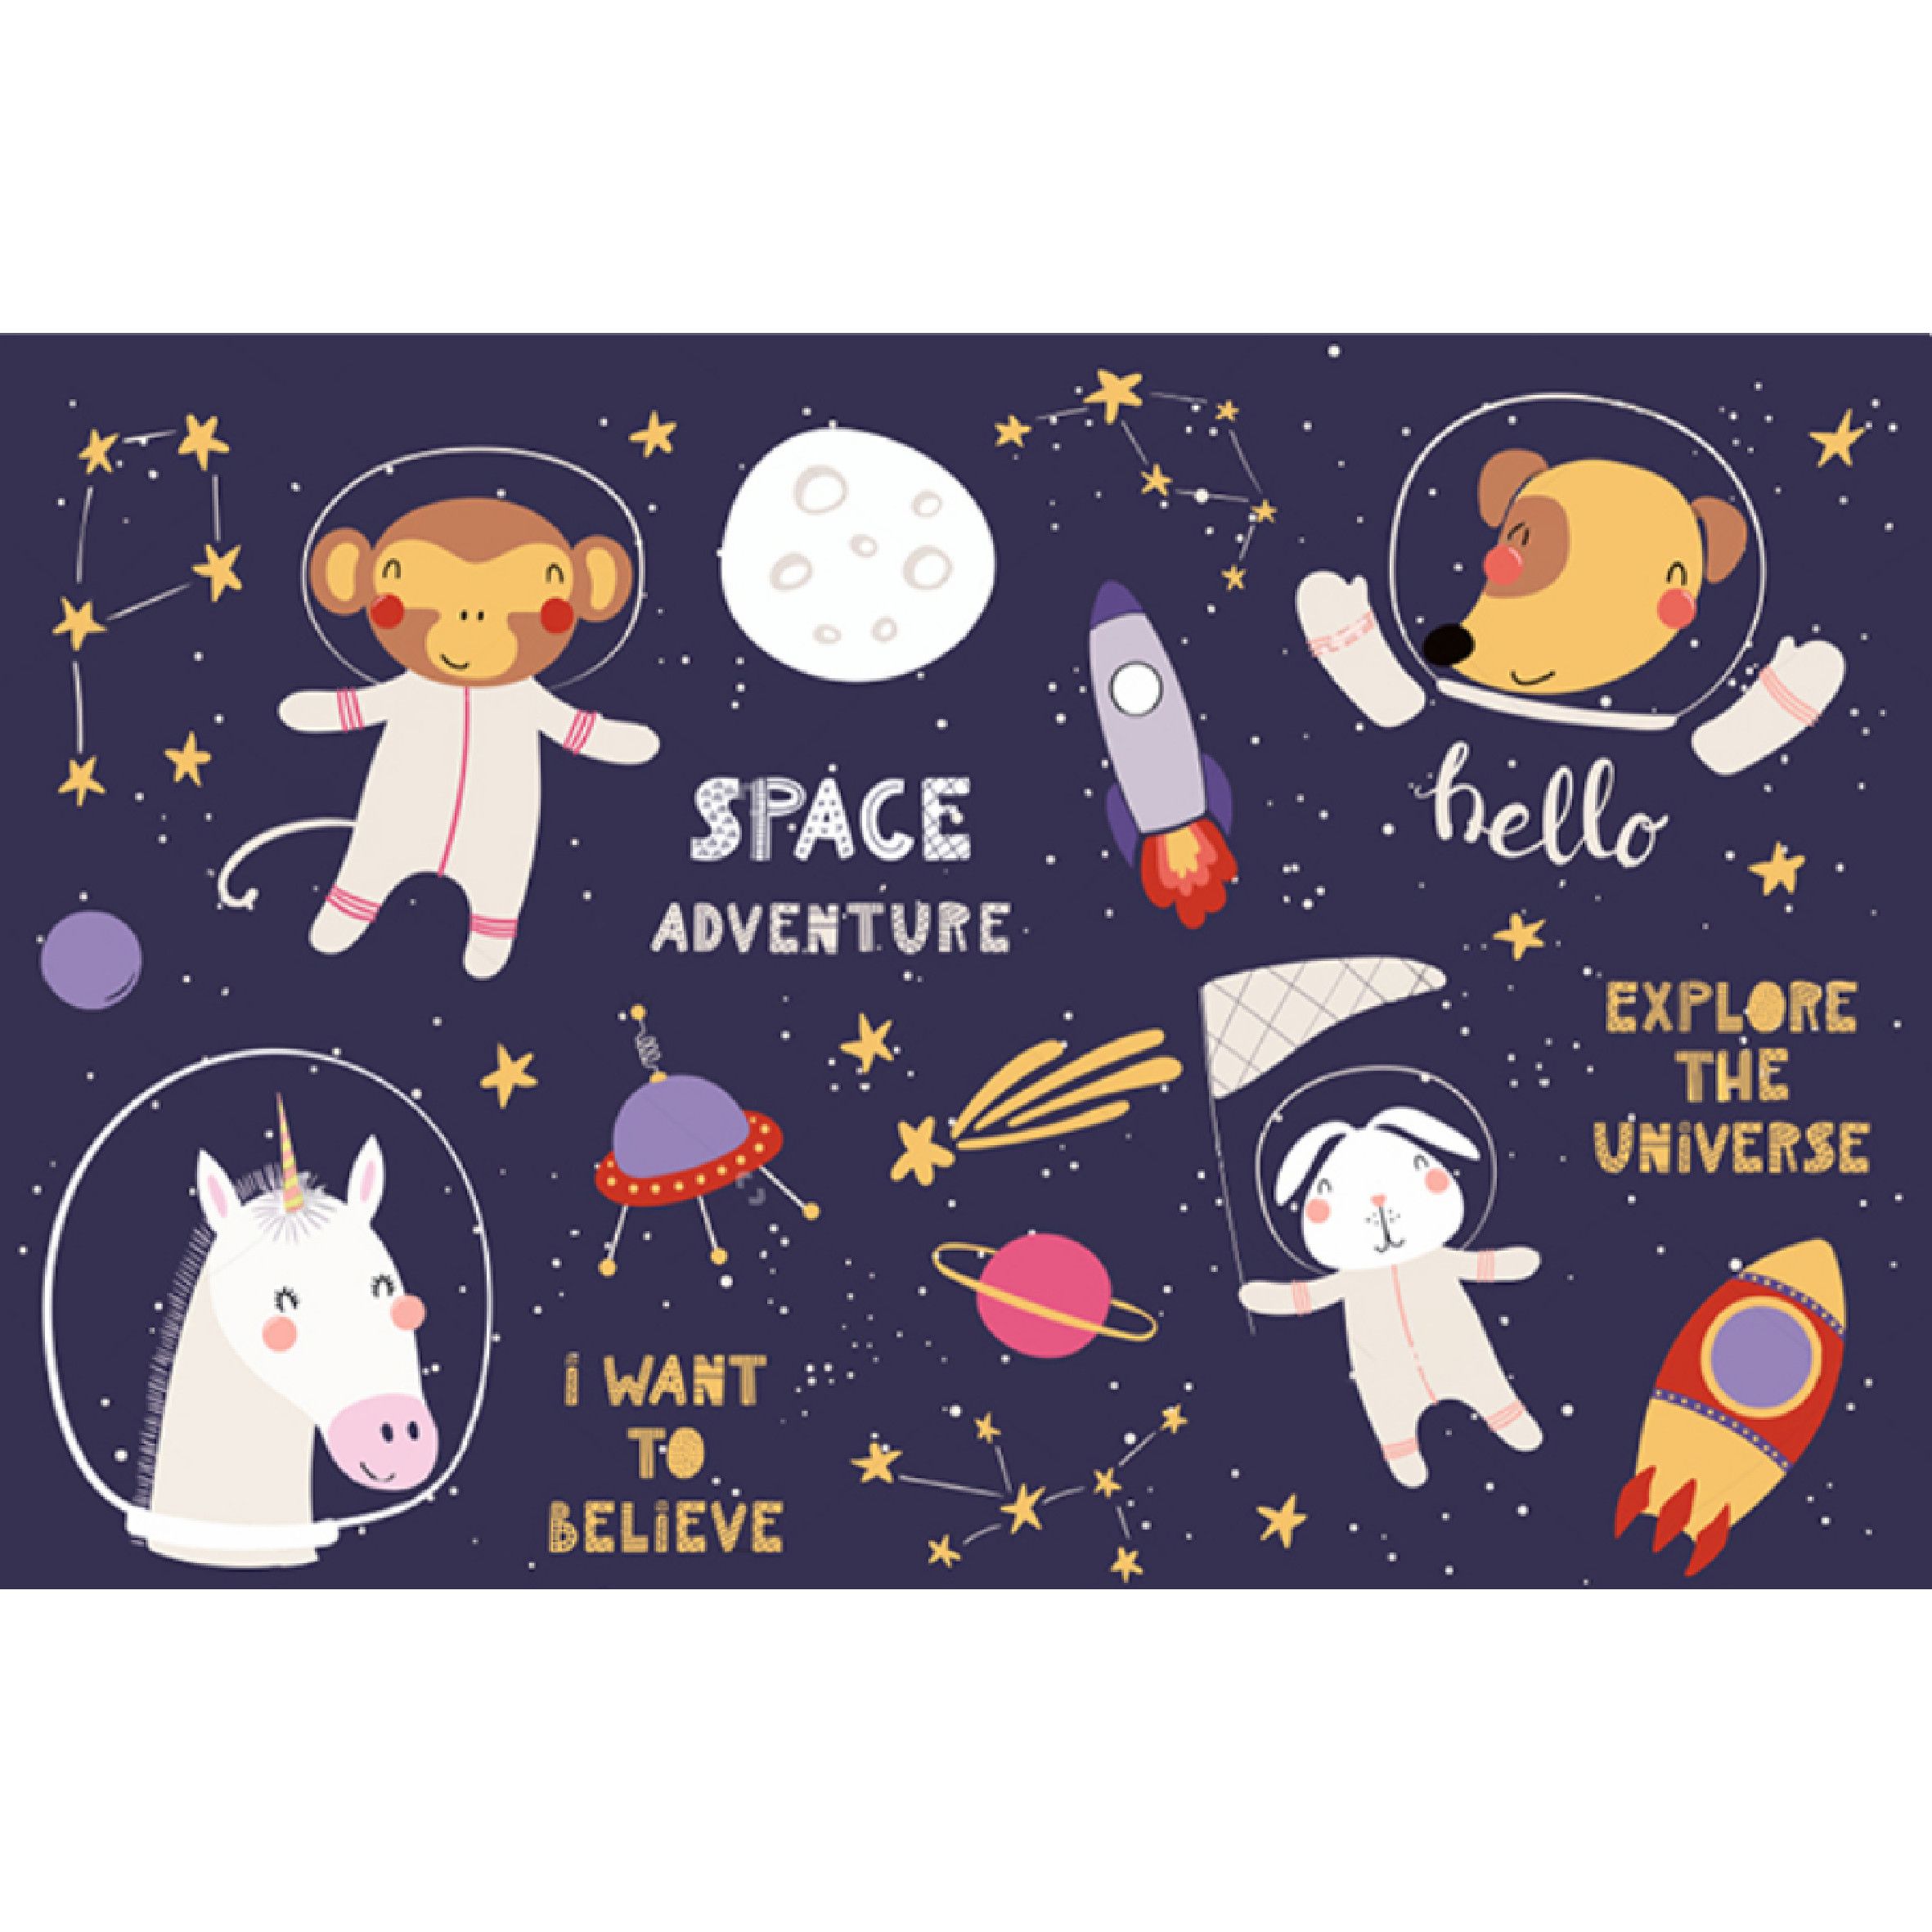 Children's Room Baby Room Universe Adventure Theme Cartoon Background Wallpaper Hot Baby Wallpaper, Wallpaper For Teenage Adult, 3D Background Board Product on Alibaba.com